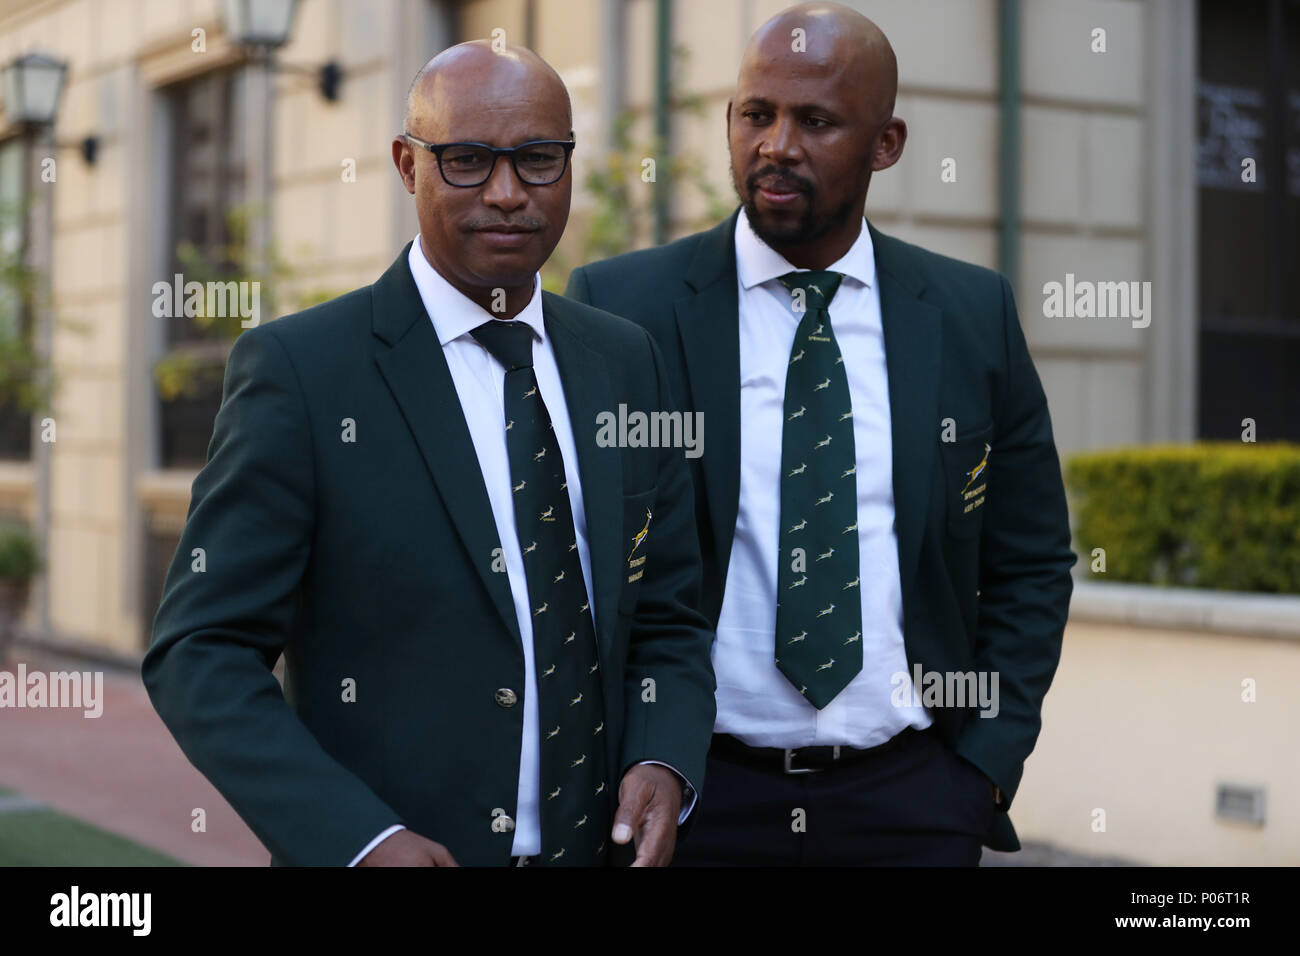 Johannesburg, South Africa. 8th June, 2018. Springboks media officer Rayaan Adrianse with Mzwandile Stick (Backs Coach) of South Africa during the South African Springbok team photo, Tsogo Sun Montecasino Hotel Johannesburg Credit: Action Plus Sports/Alamy Live News Stock Photo